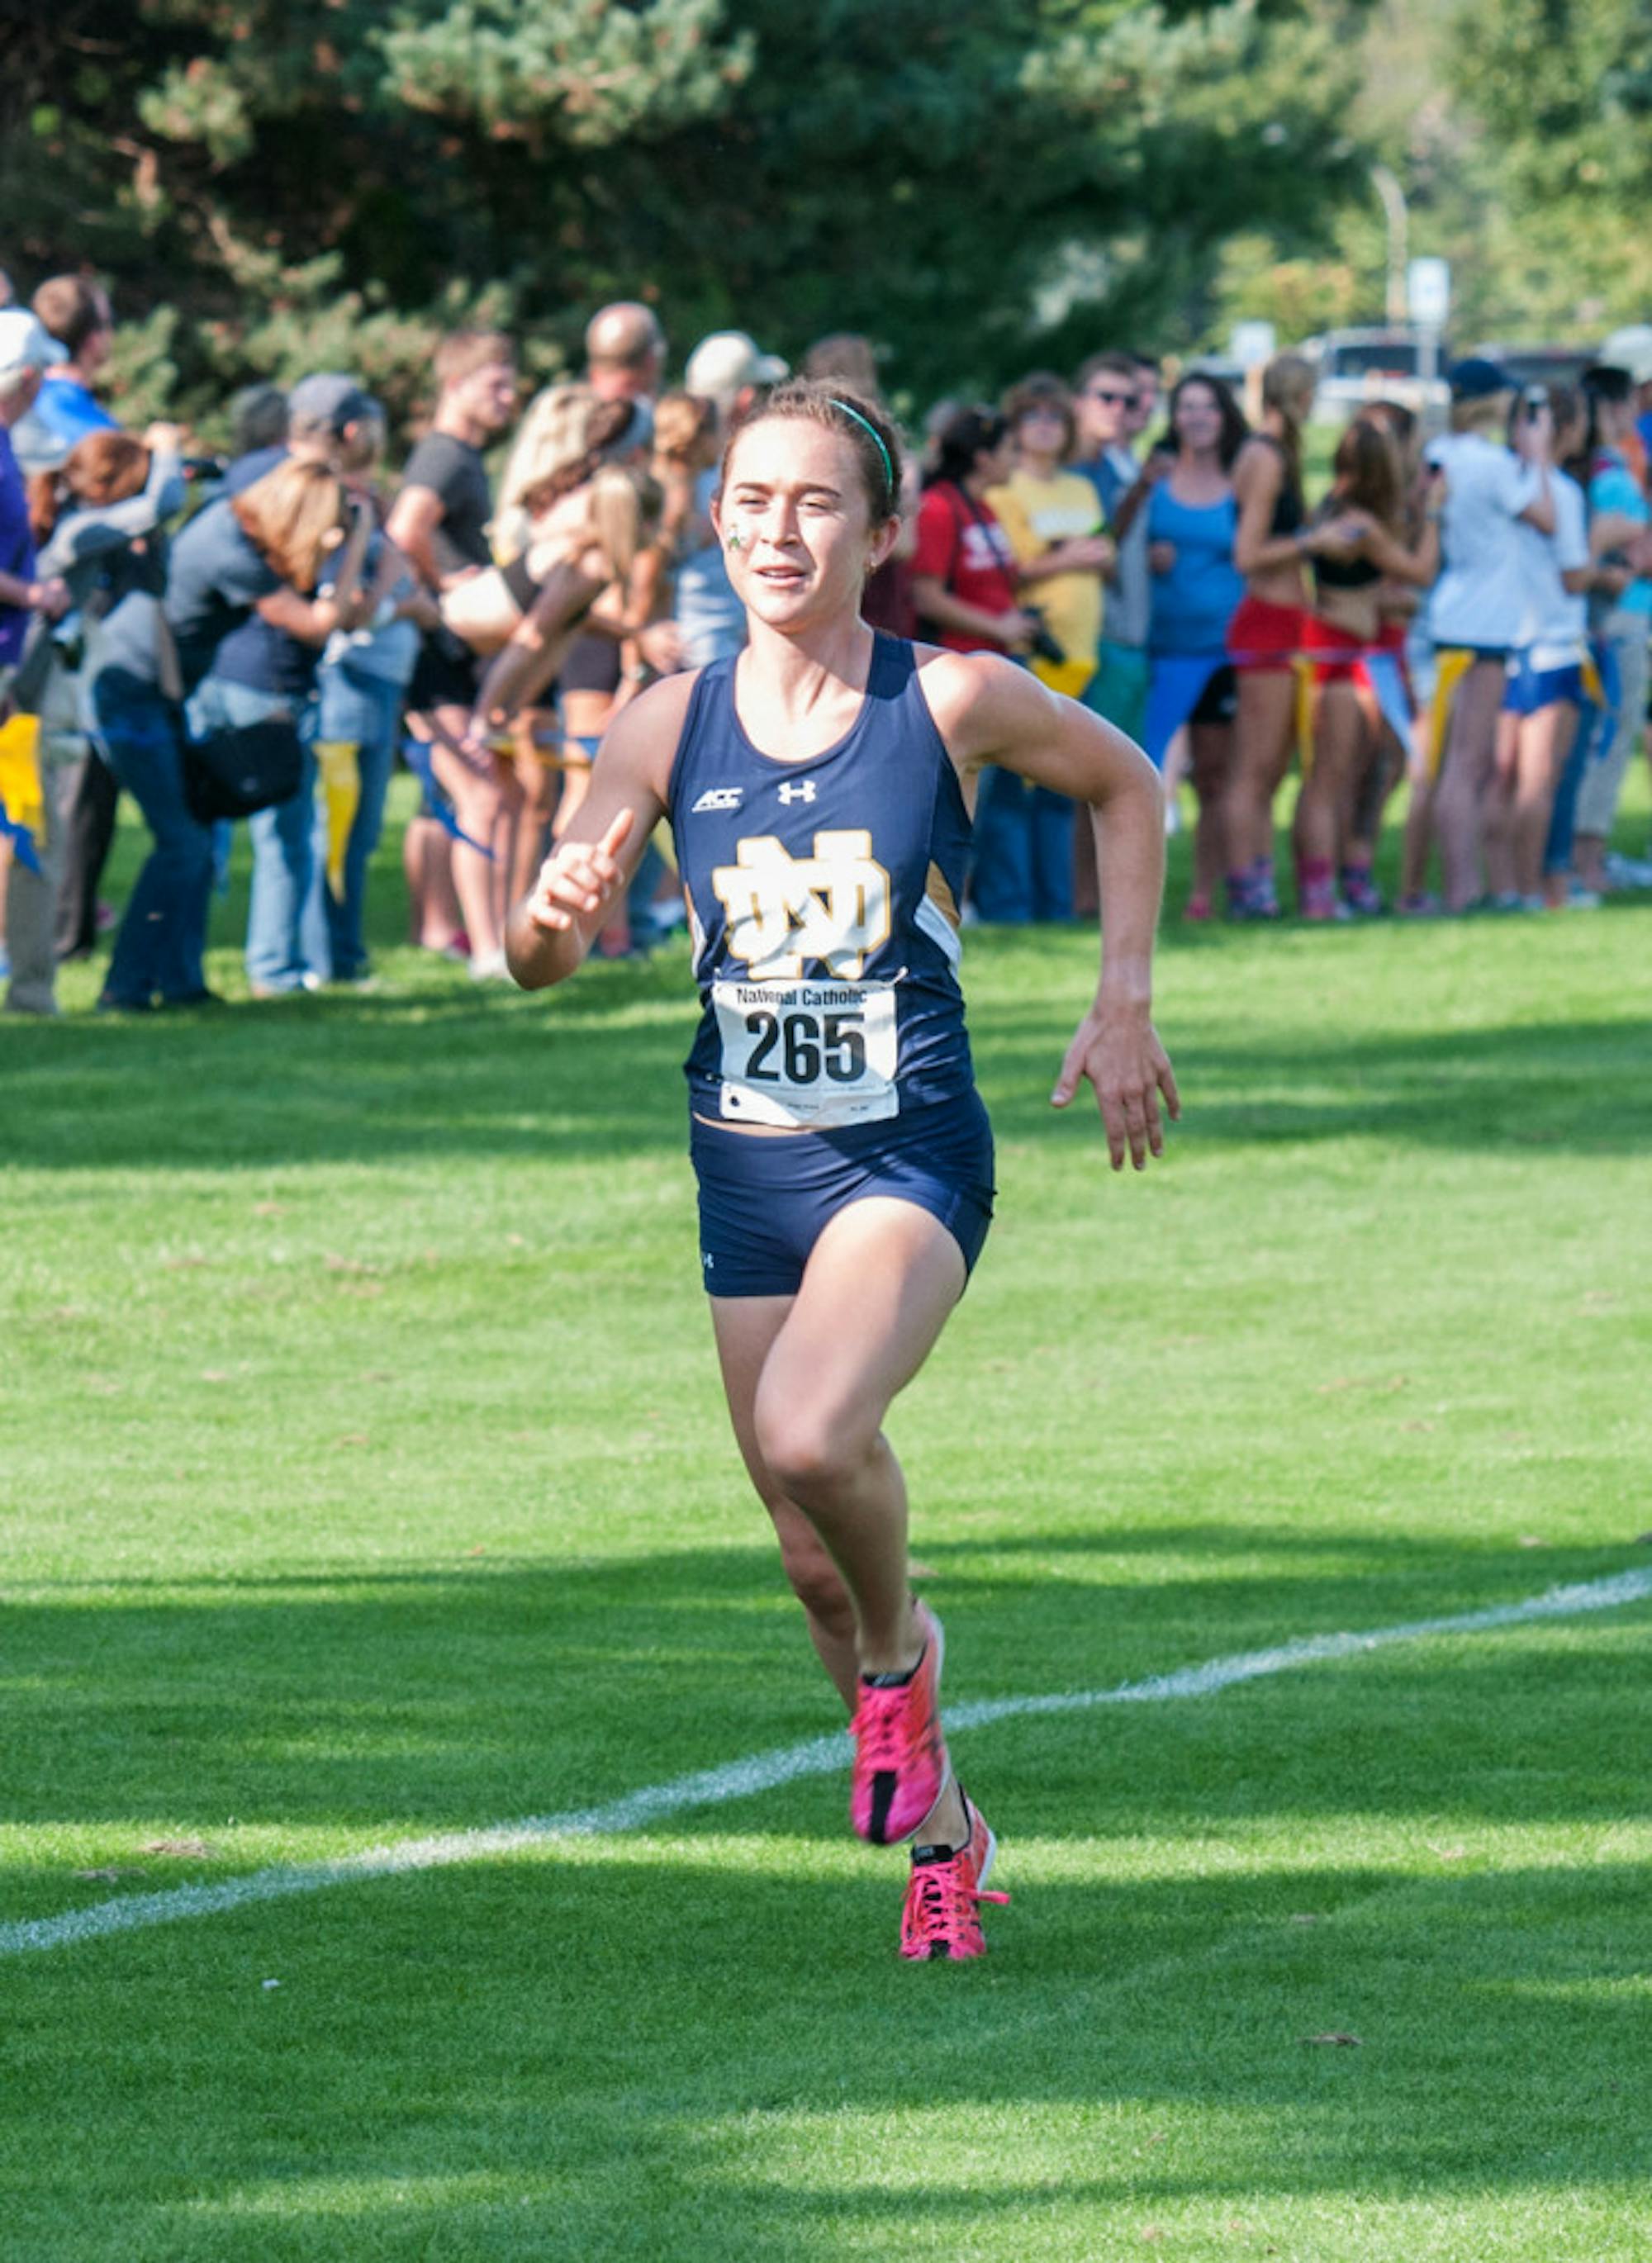 Molly Seidel races during the fall cross country season at the National Catholic Championships on Sept. 19 at Notre Dame Golf Course.